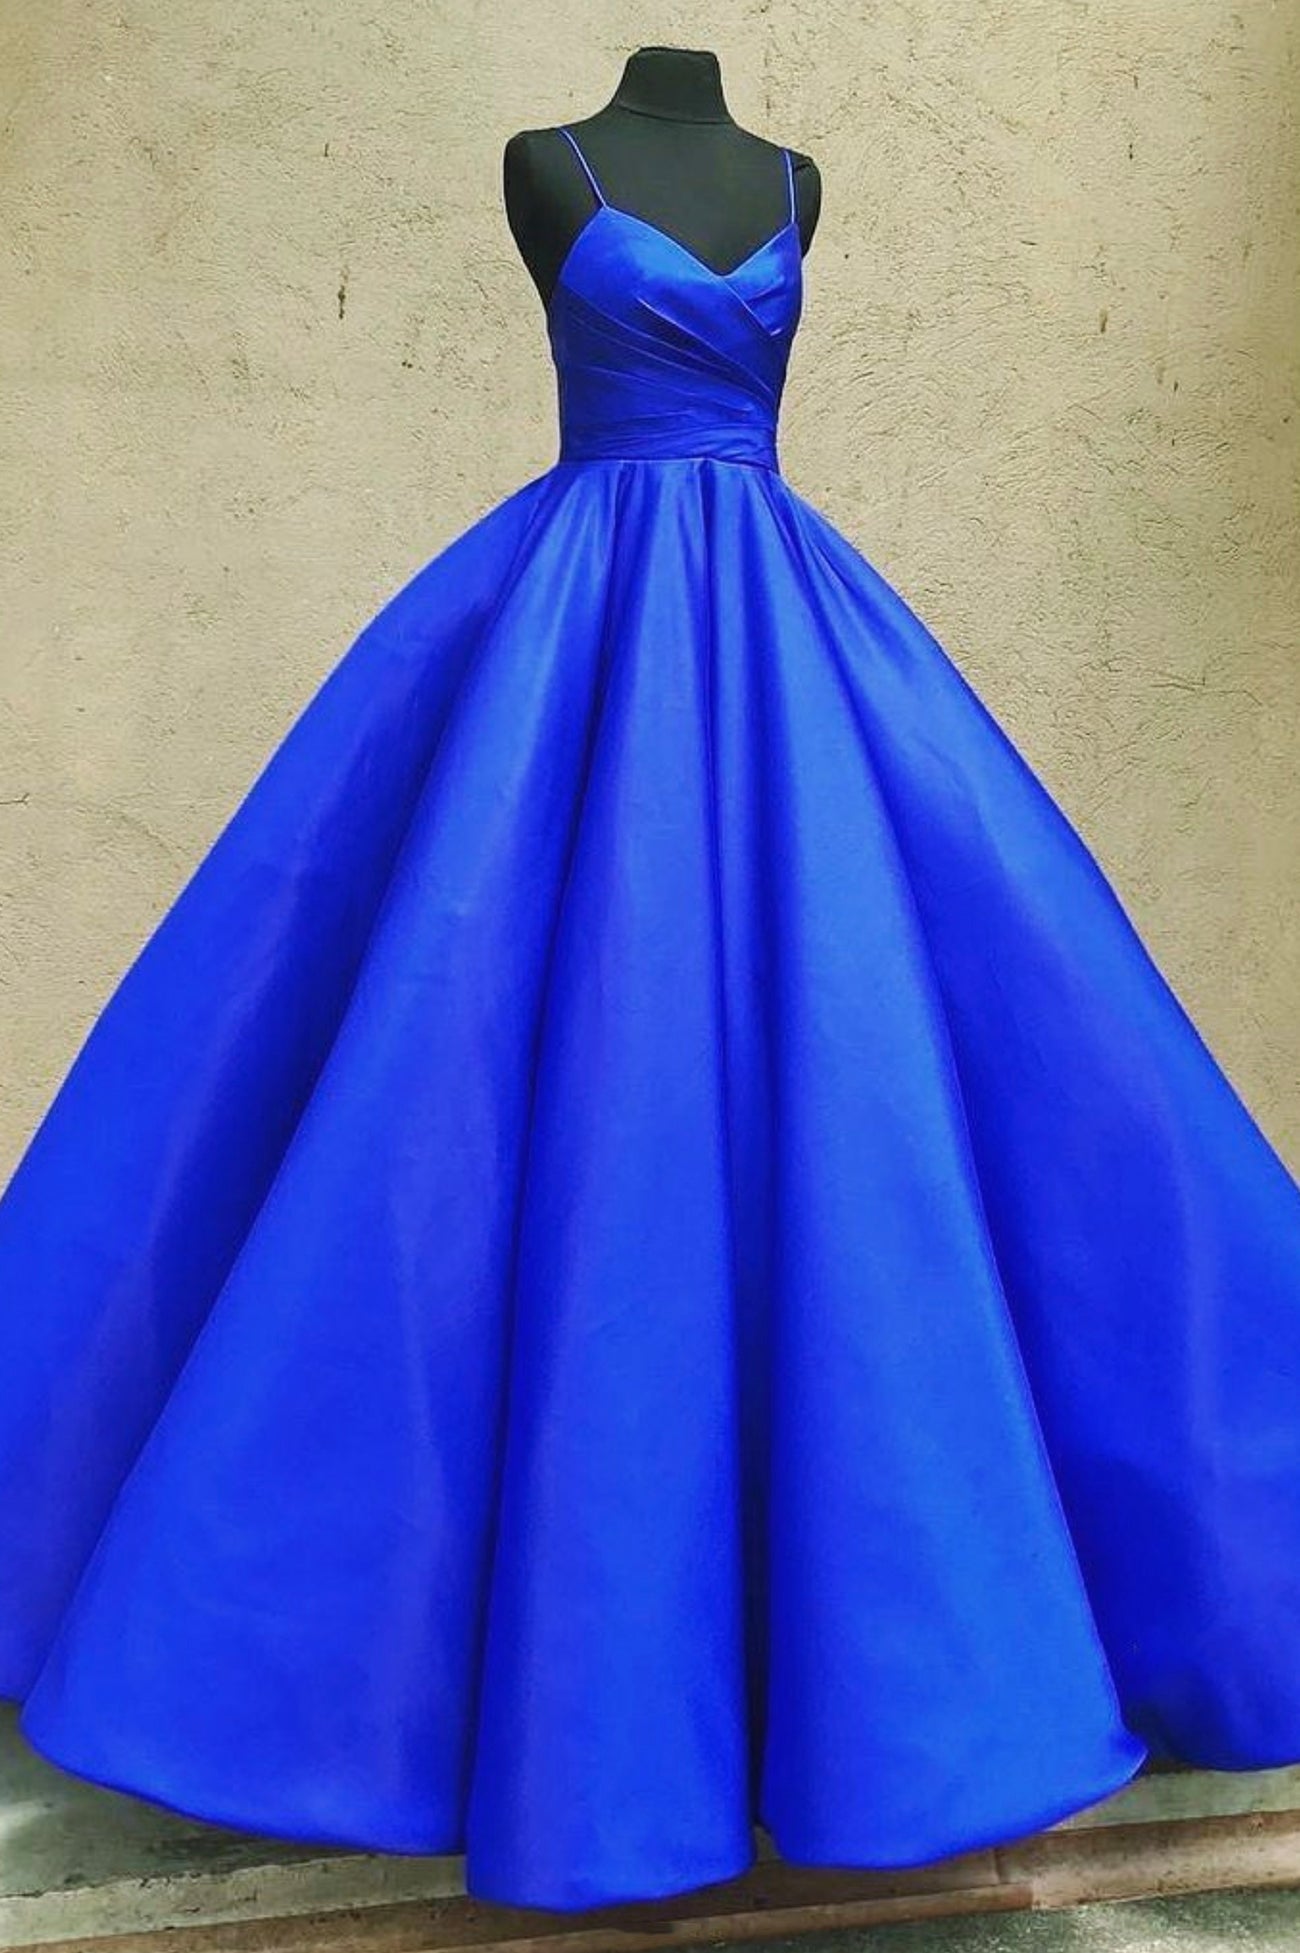 Blue Spaghetti Satin Long Formal Dress Outfits For Girls, A-Line Evening Party Gown